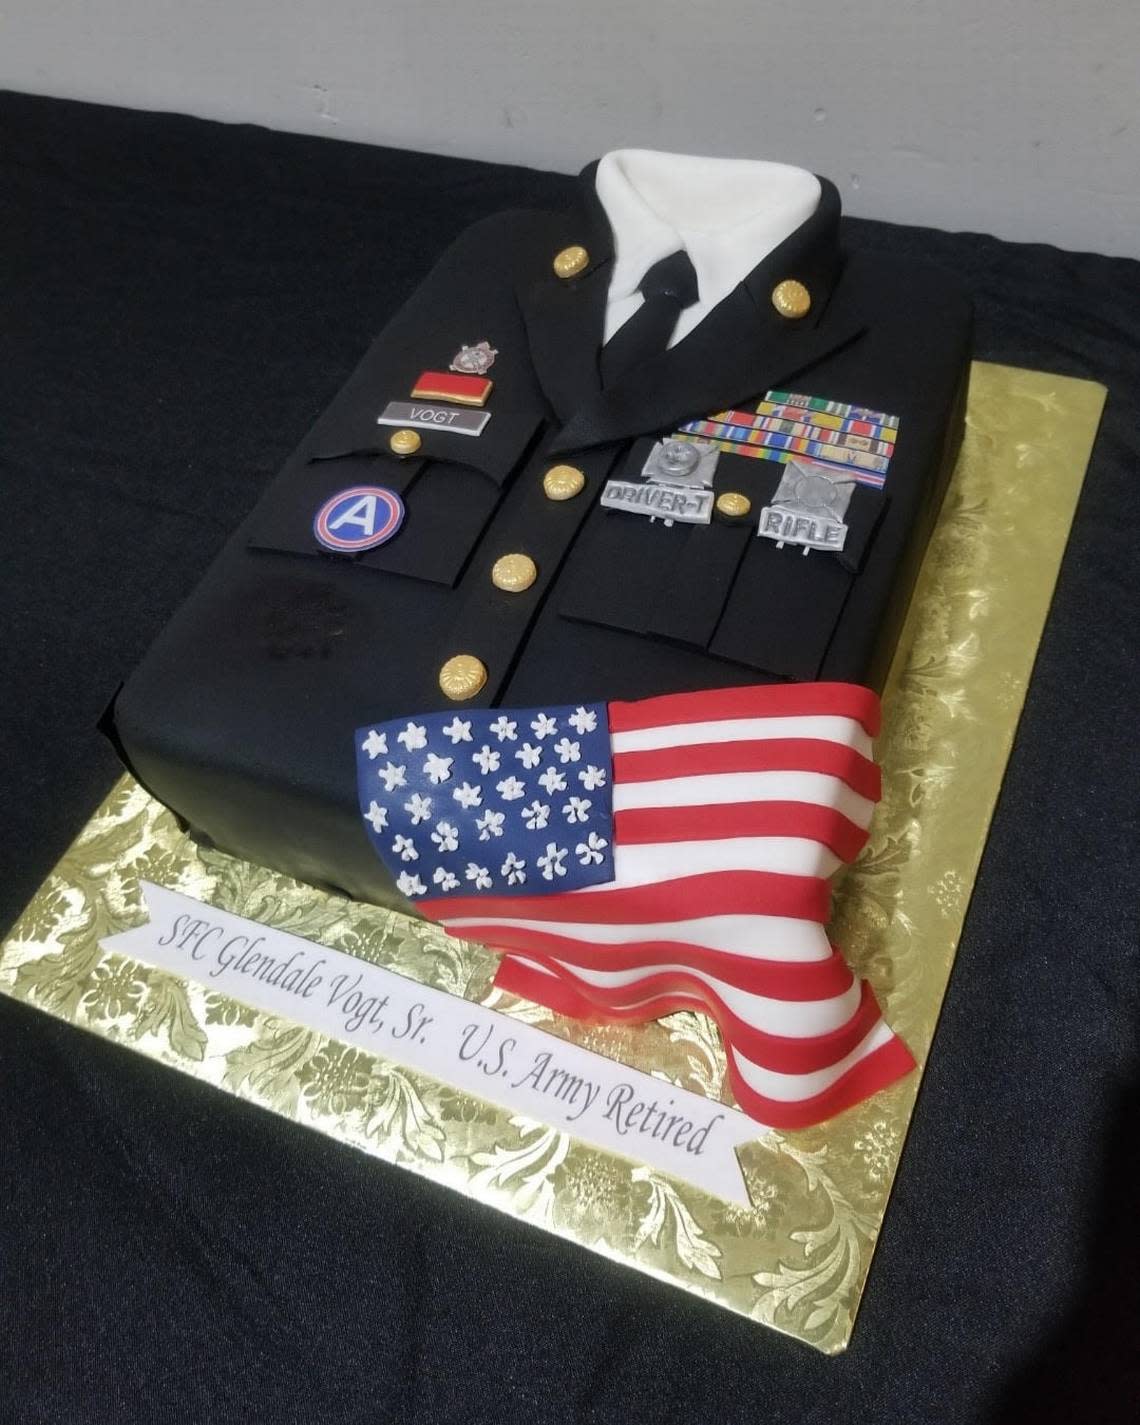 A custom cake from Sweet GG’s Bakery in Five Points.